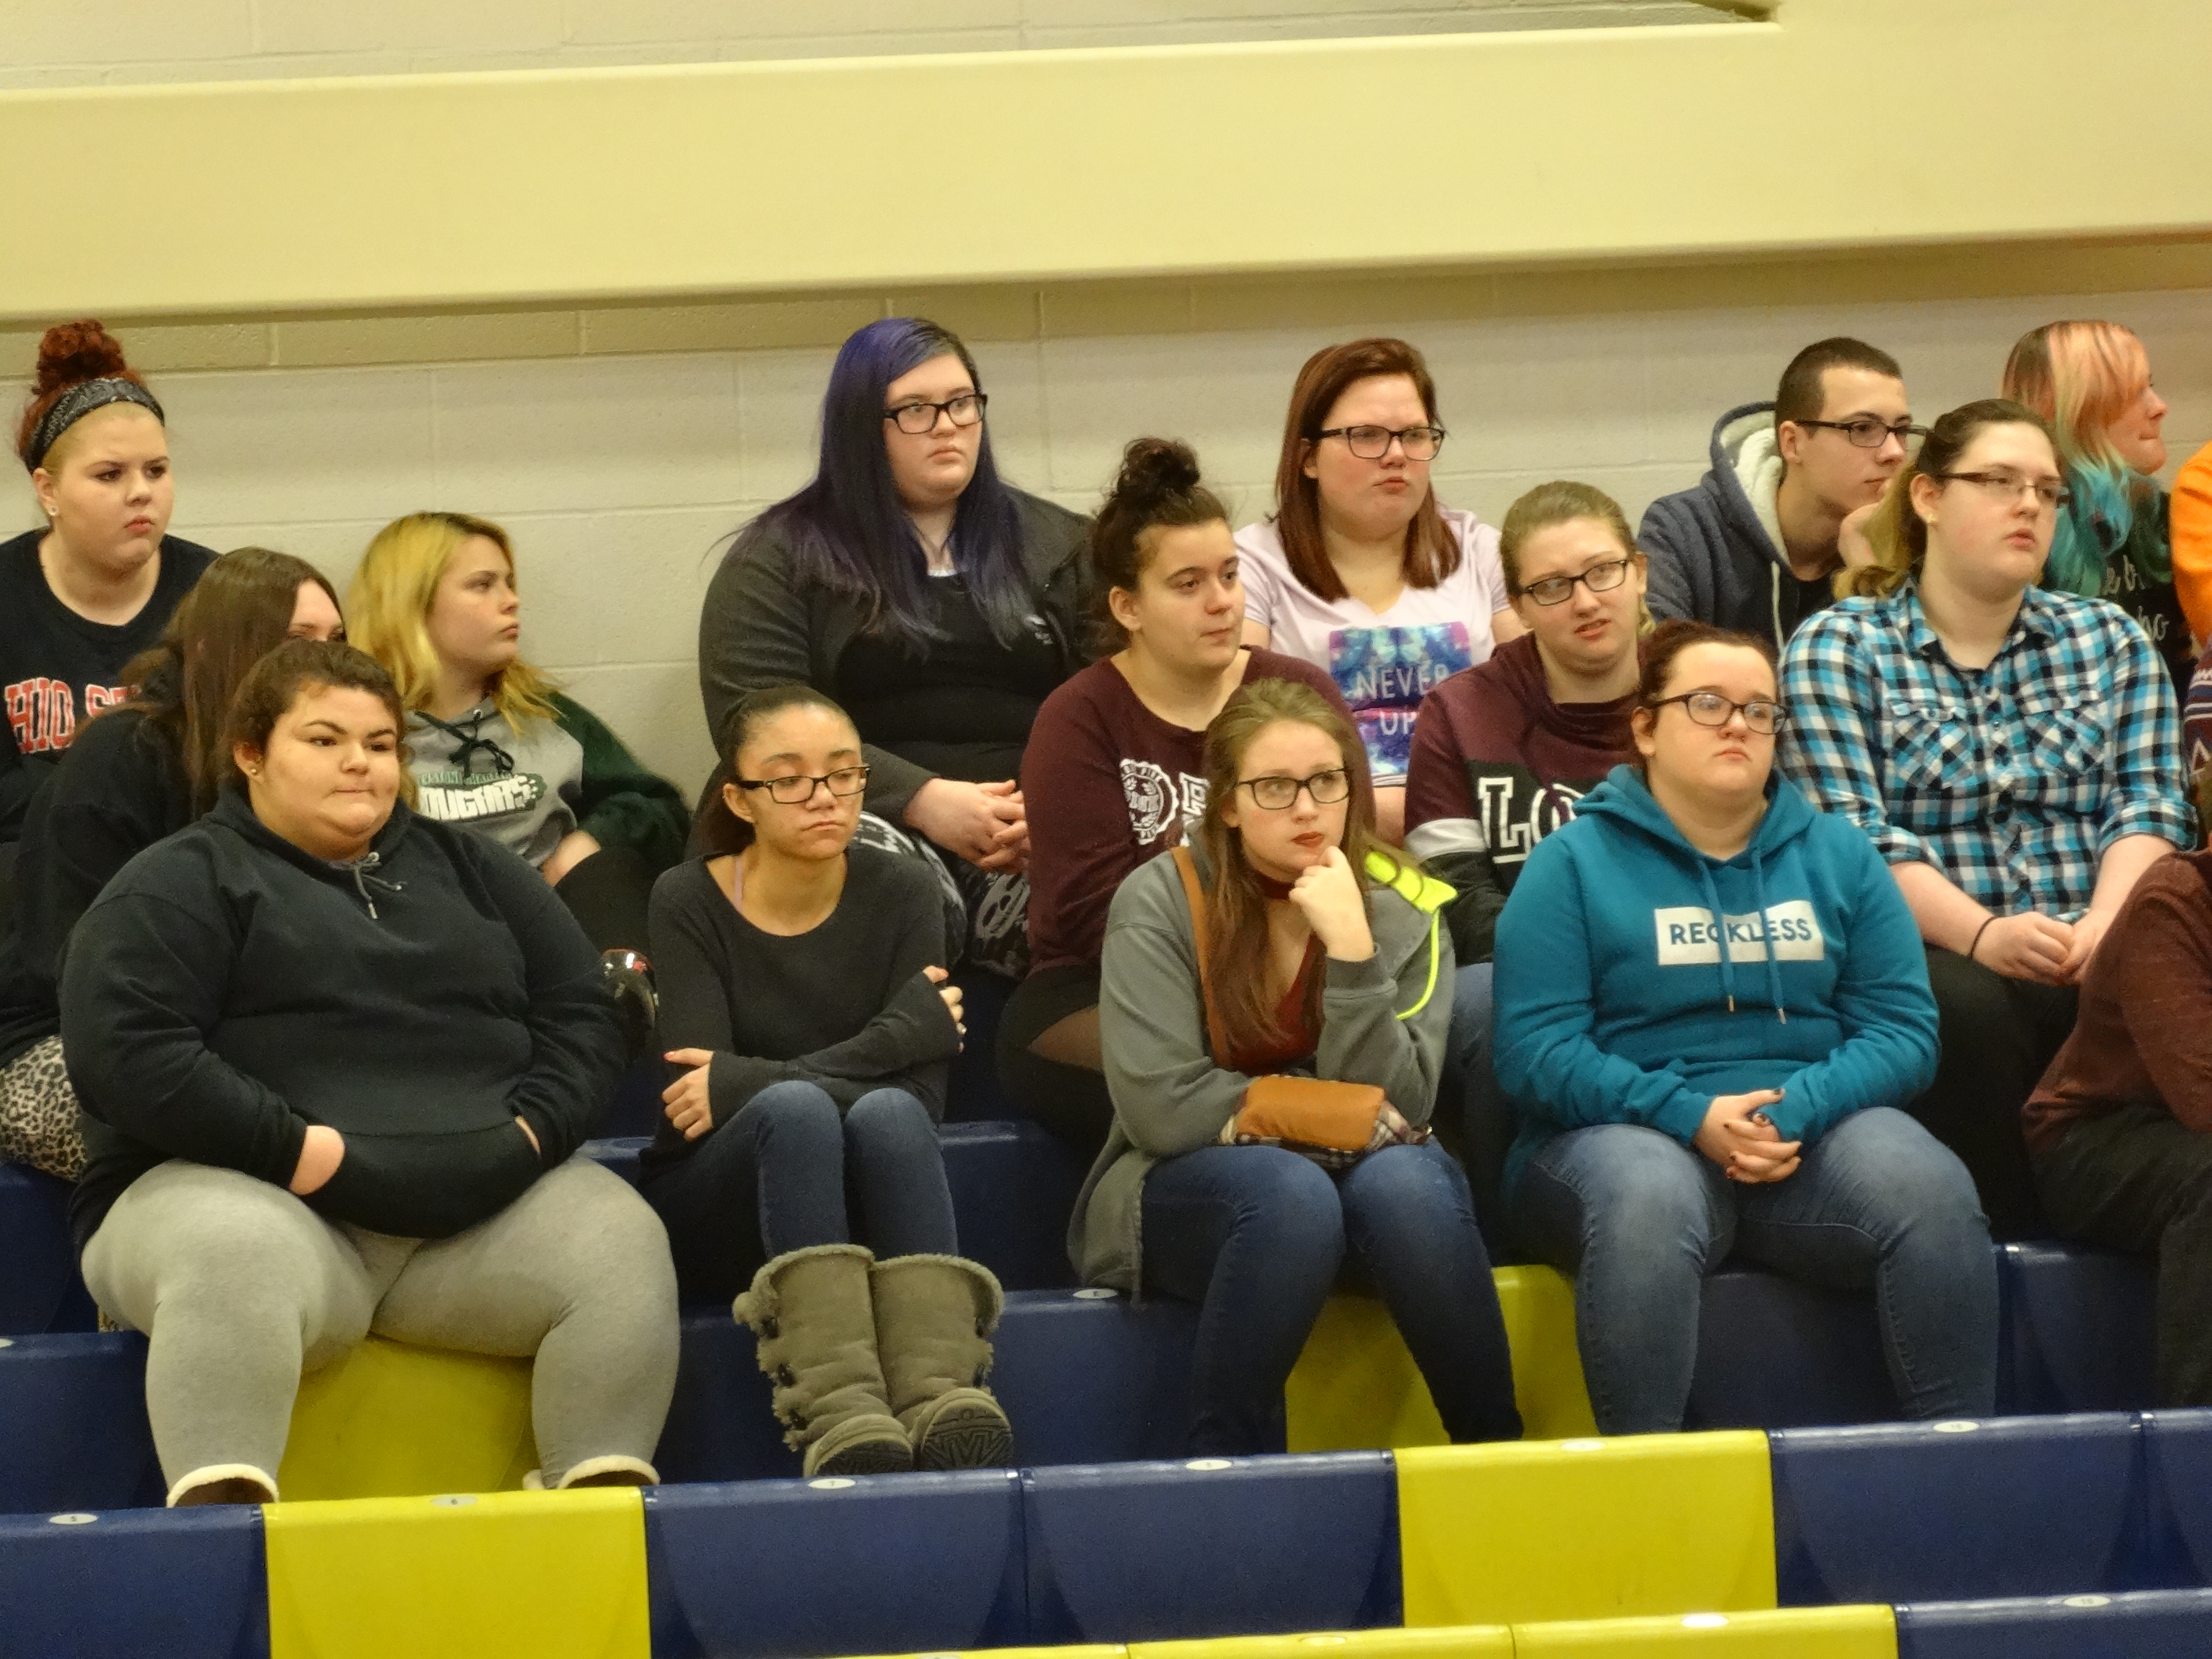 Brookfield High School students gathered in the gym March 14 for a program to mark the one-month anniversary of the Parkland, Fla. school shootings.